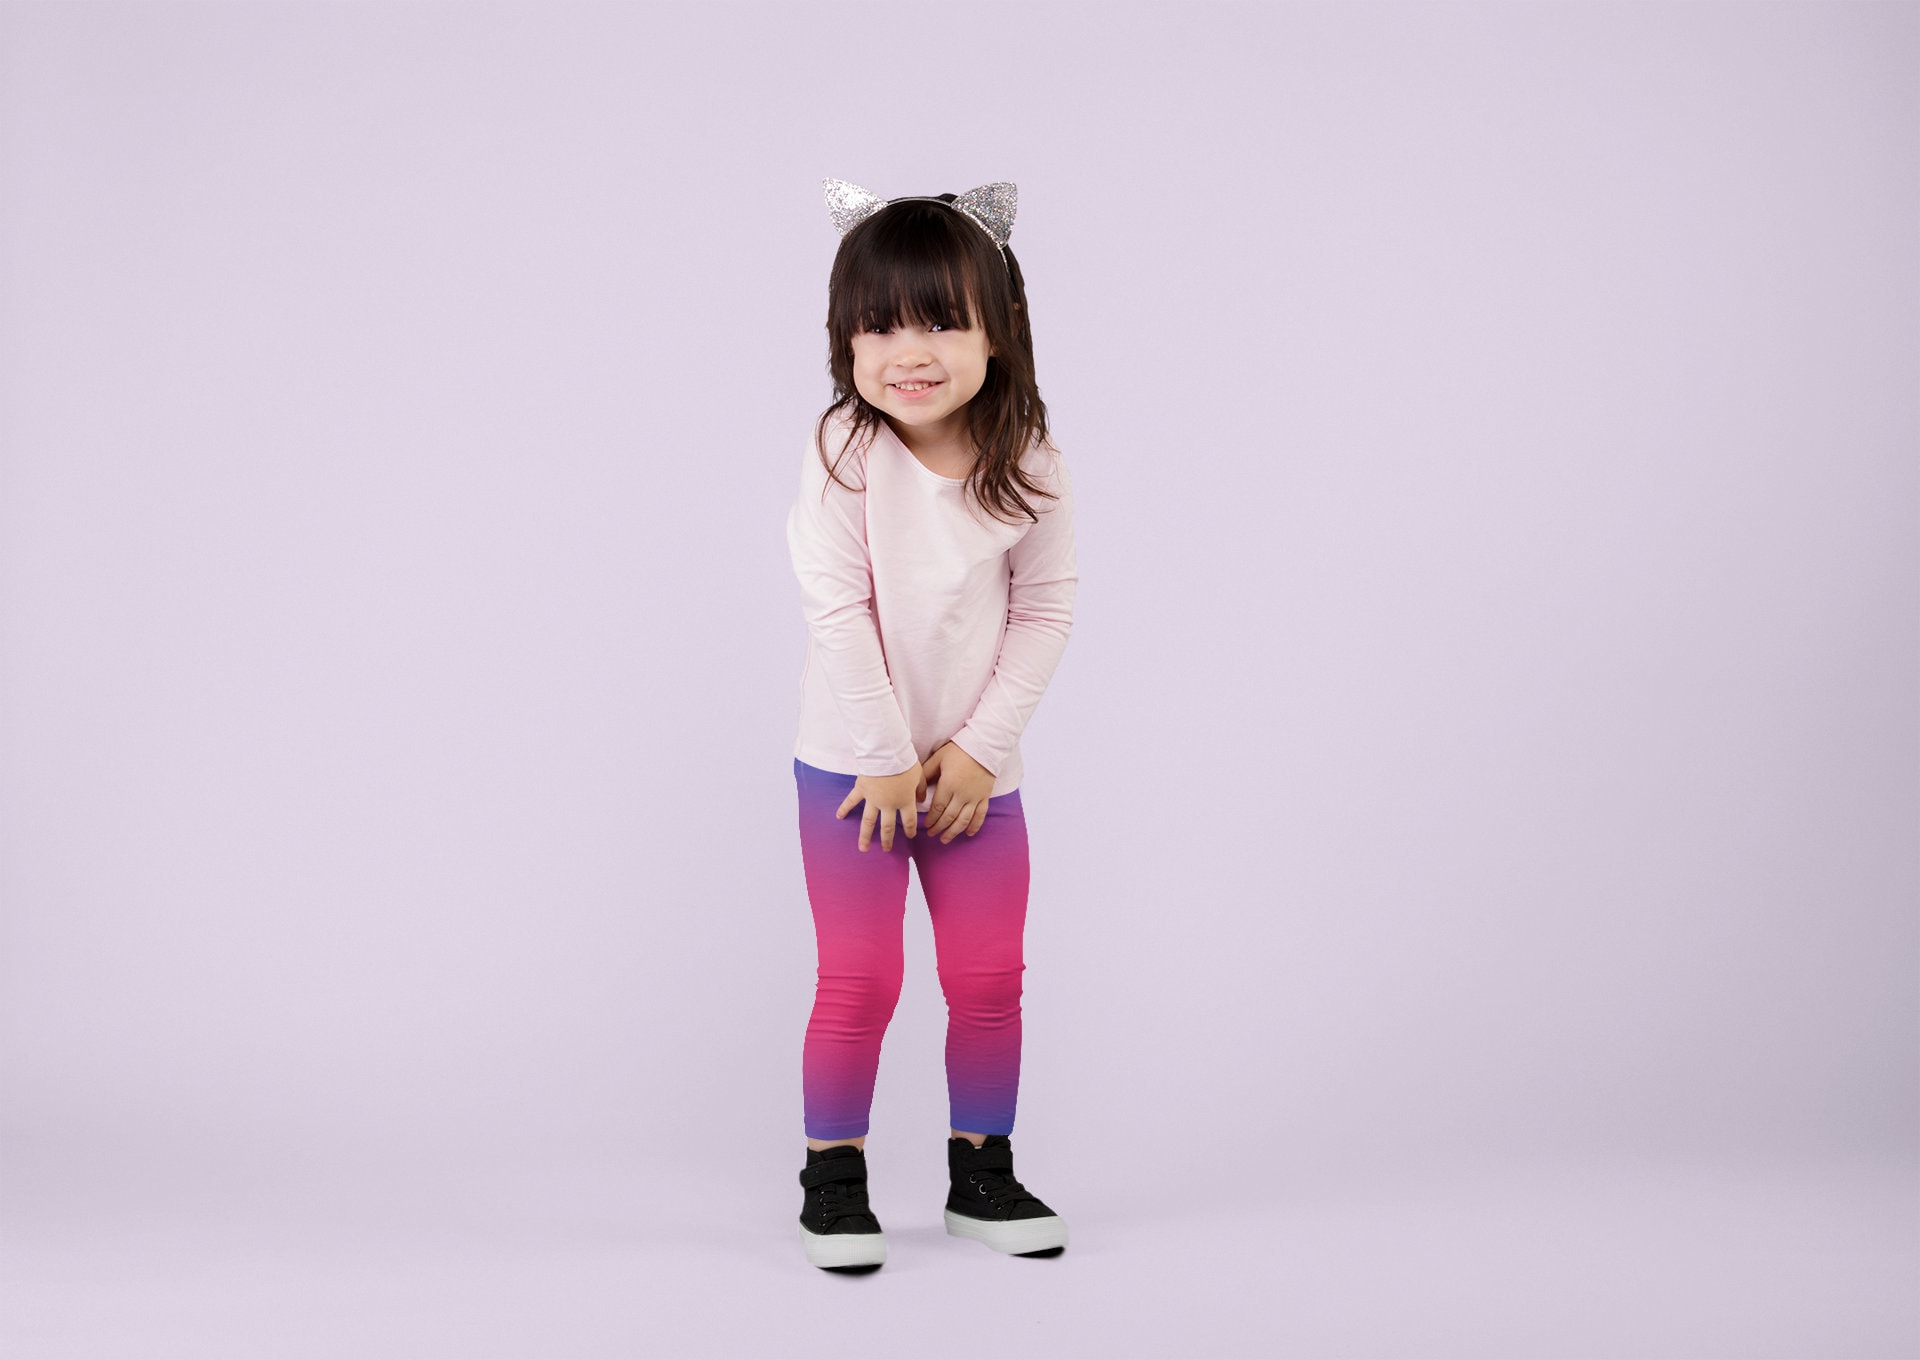 KIDS FASHION Trousers Sports Pink/Purple 12Y discount 70% Yd active Leggings 